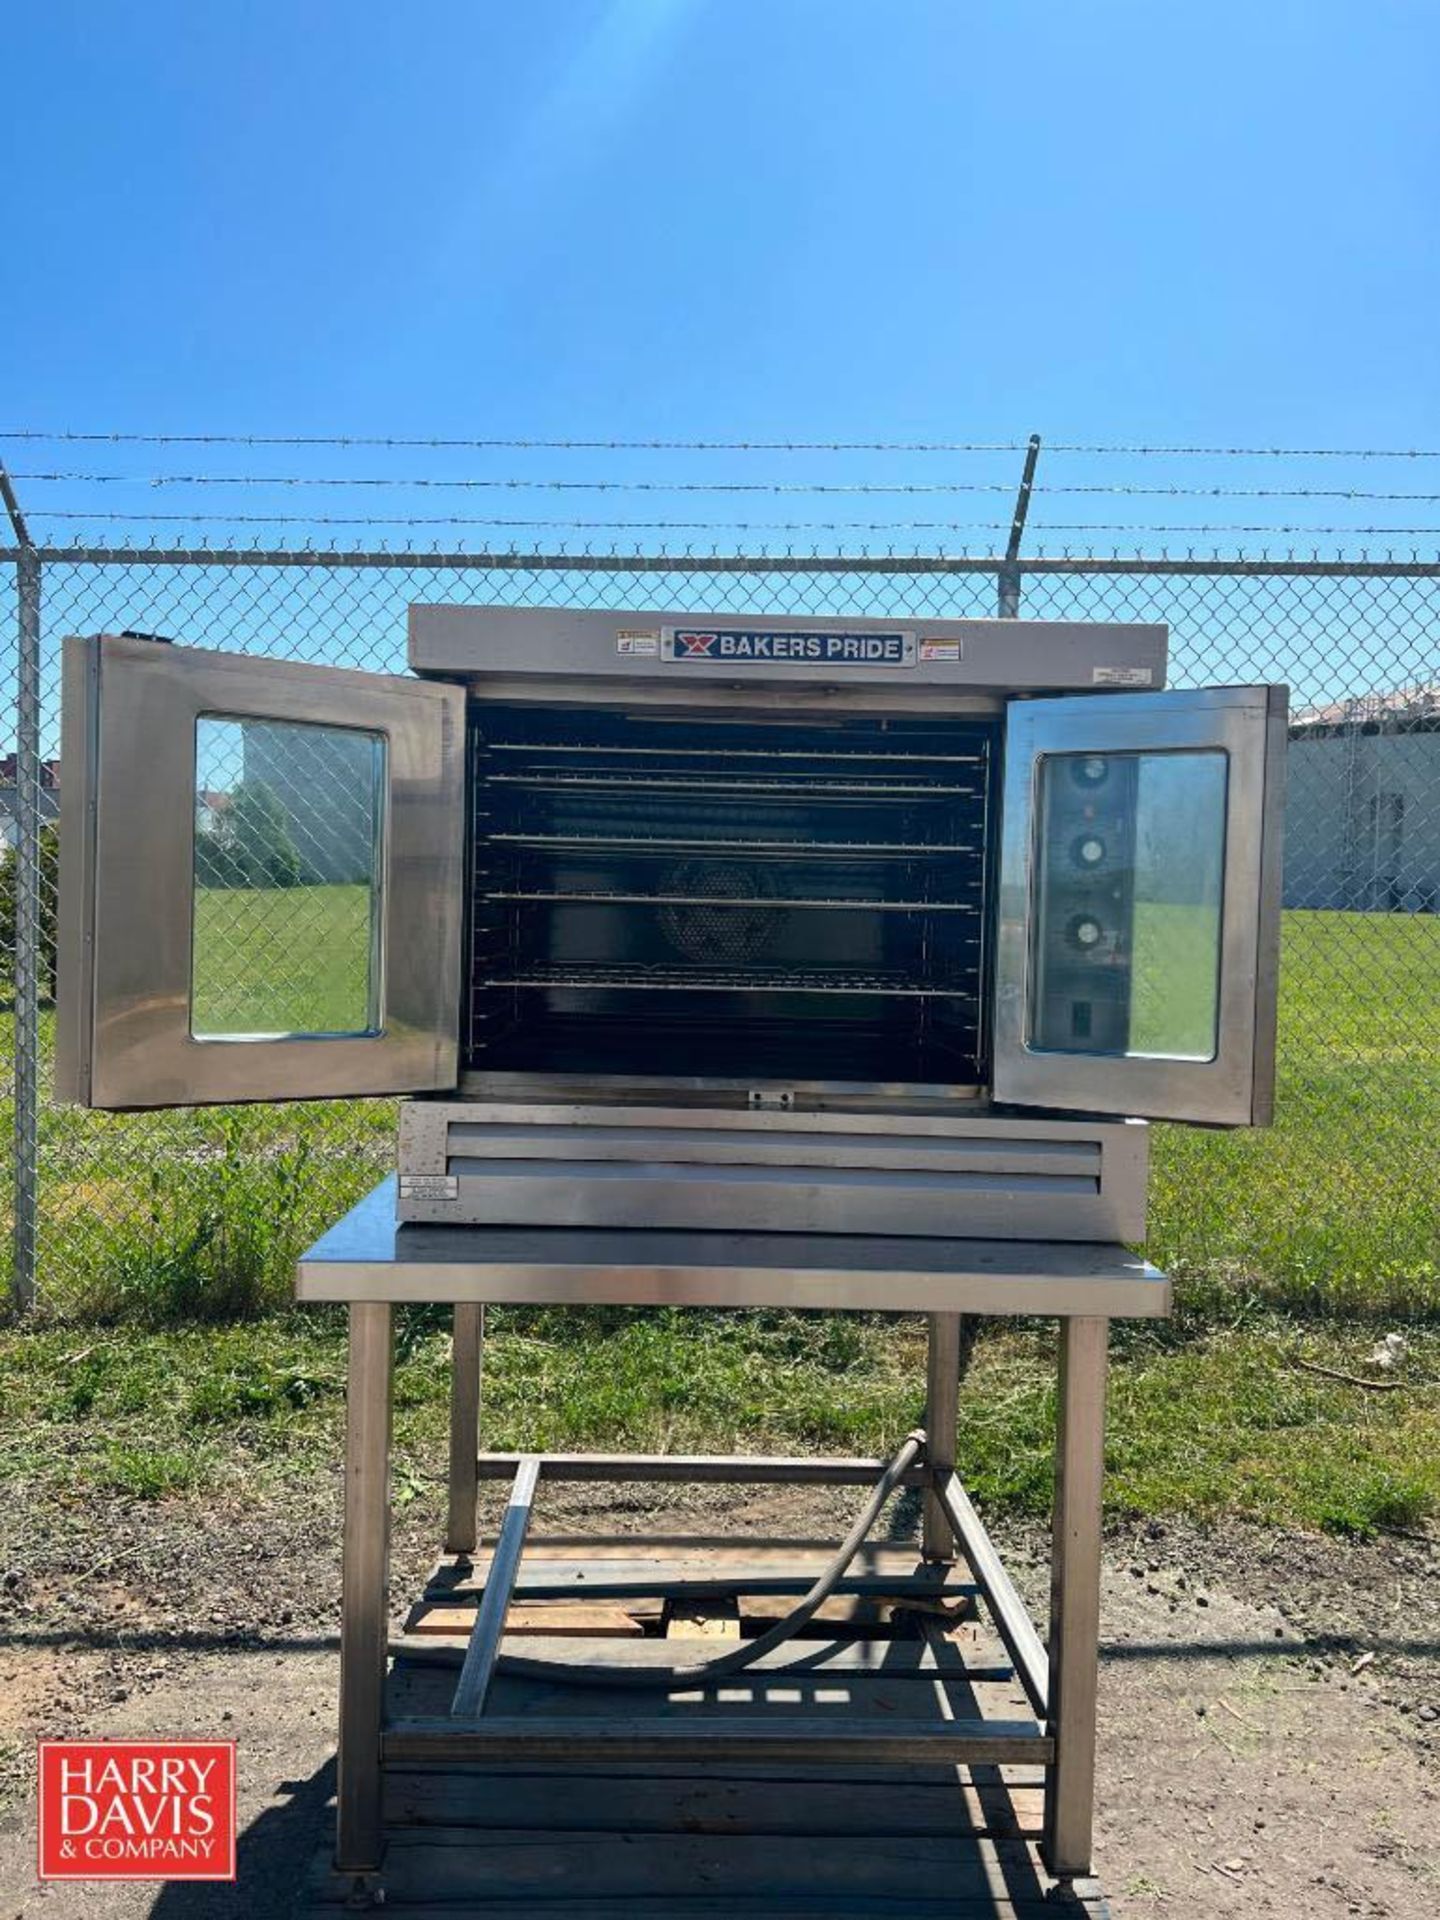 Bakers Pride S/S Cyclone 2-Door Oven, Model: 455BC0GN1, S/N: 65235-0703051 (Location: Butler, PA) - Image 2 of 4